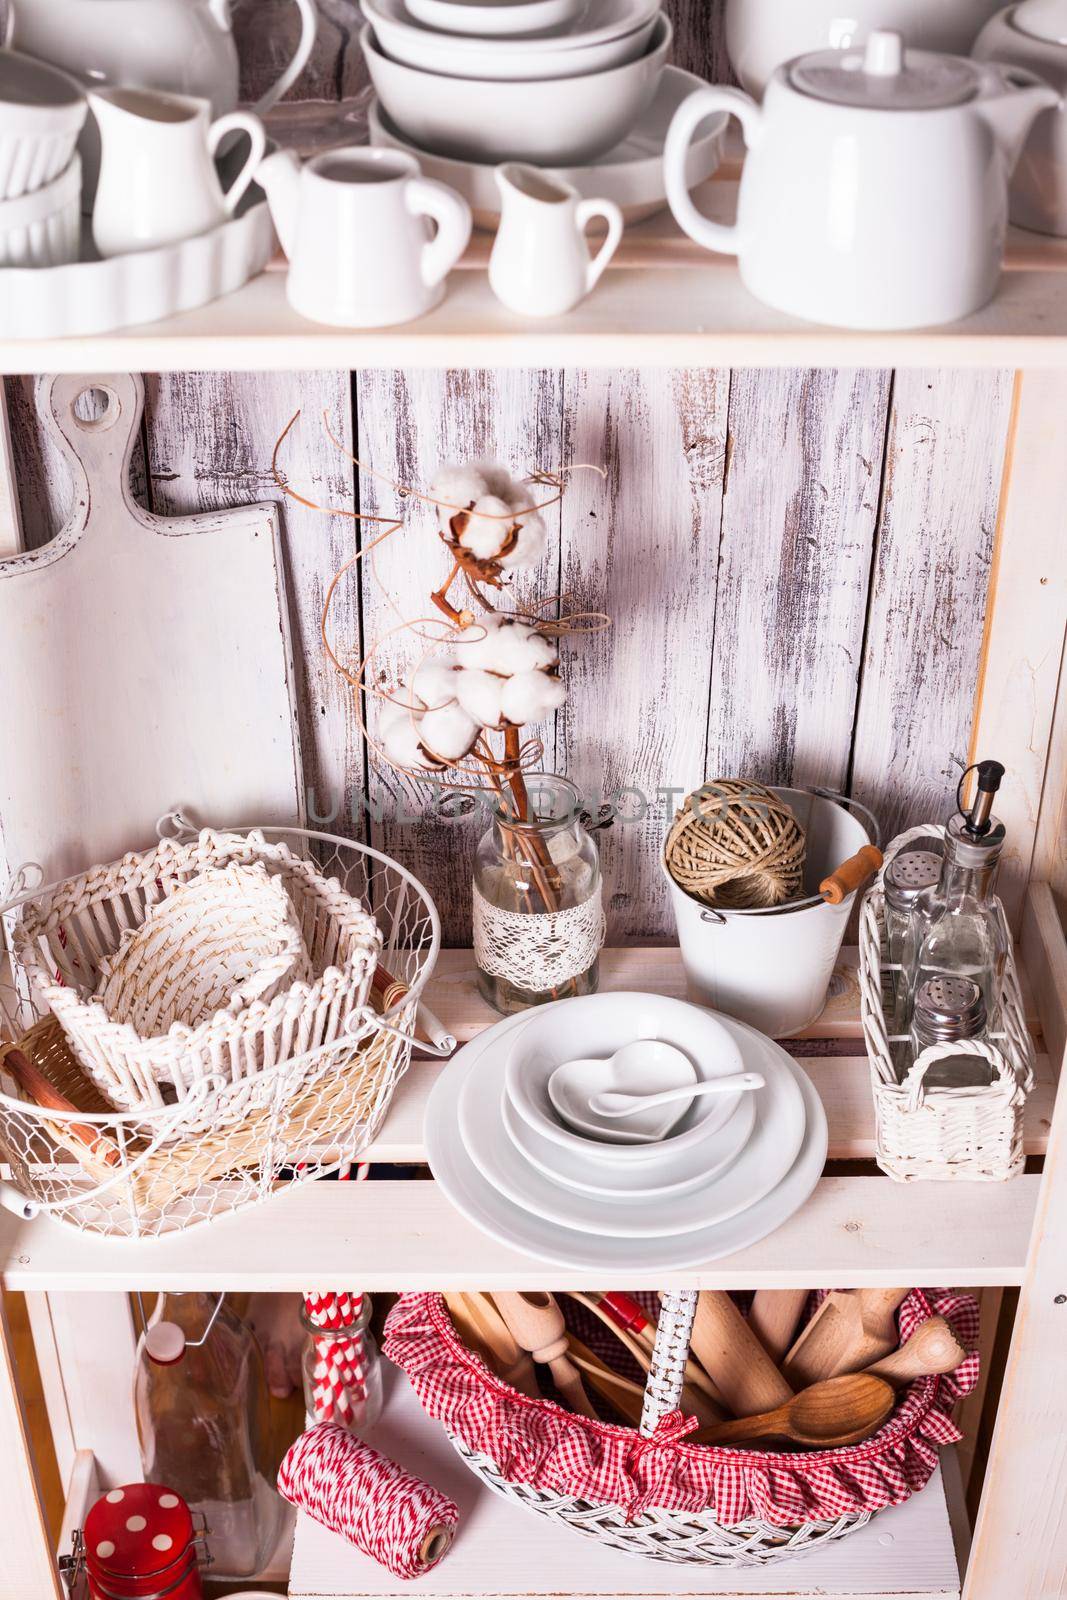 Lovely homeware and dishware in the kitchen at shabby chic style